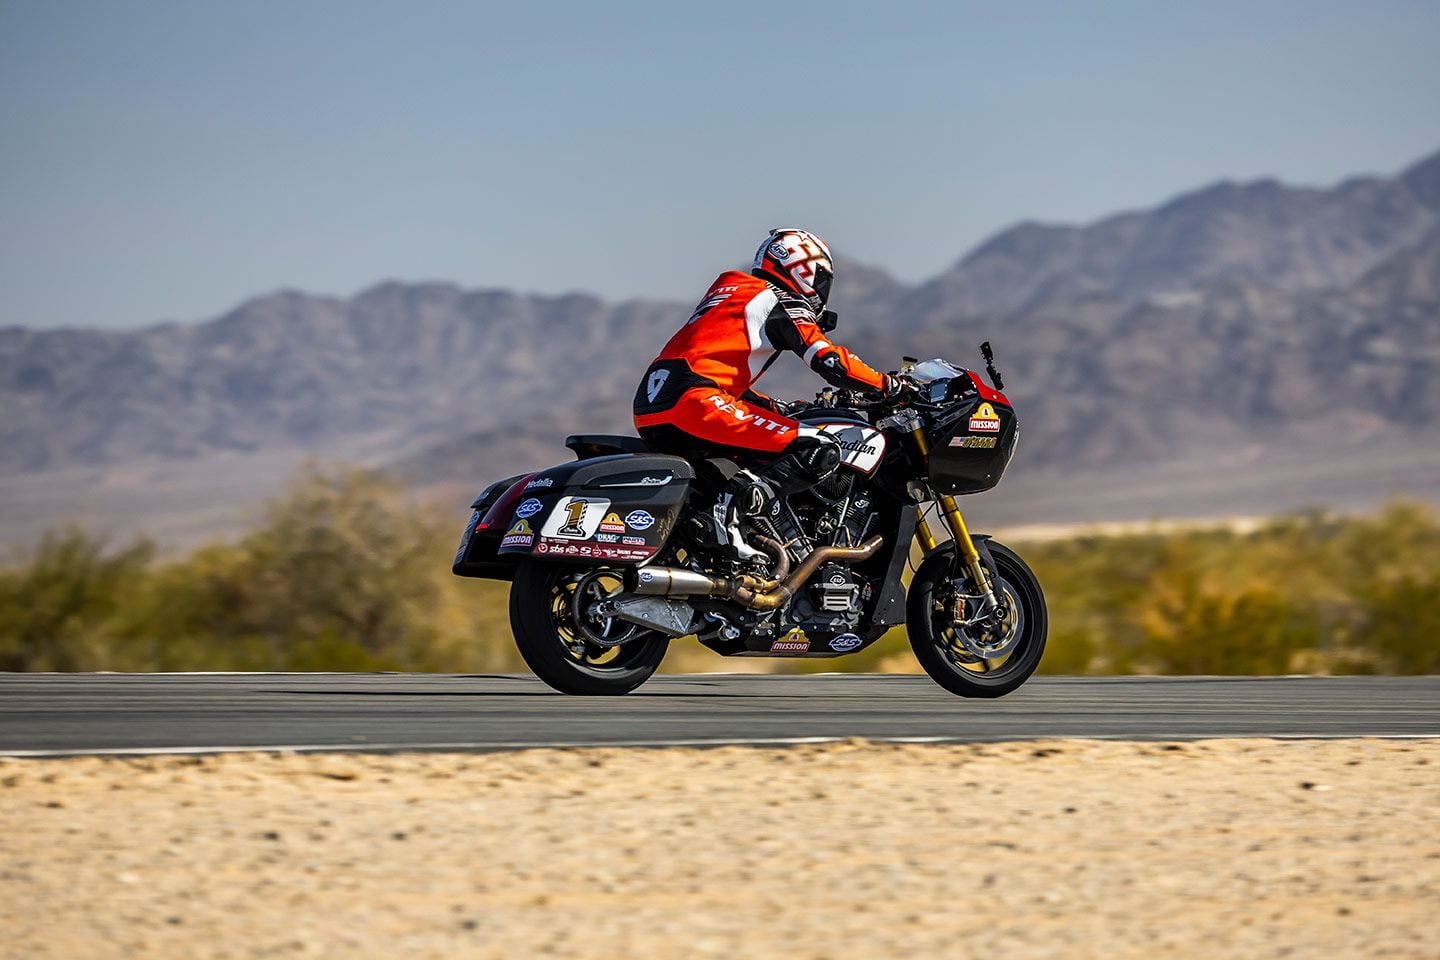 Mid transition at Chuckwalla Valley Raceway. The most surprising thing about the Challenger is how agile it is in side-to-side transitions.